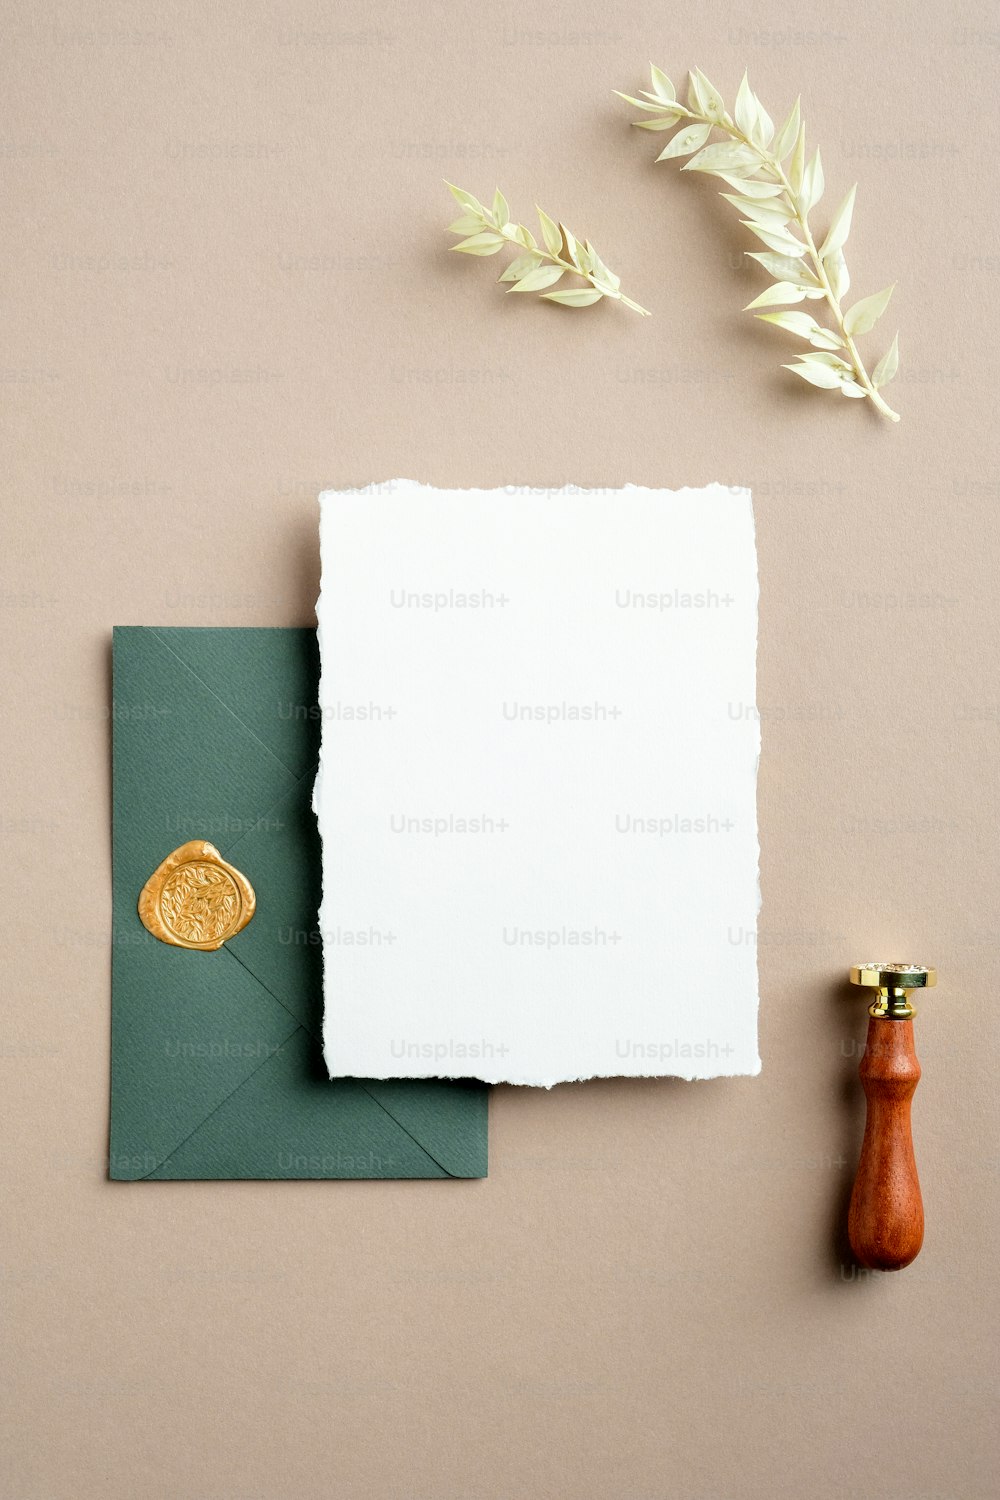 Elegant wedding stationery mockup scene. Blank greeting card, green envelope with wax seal stamp, dried flowers on pastel beige background. Flat lay, top view, vertical.